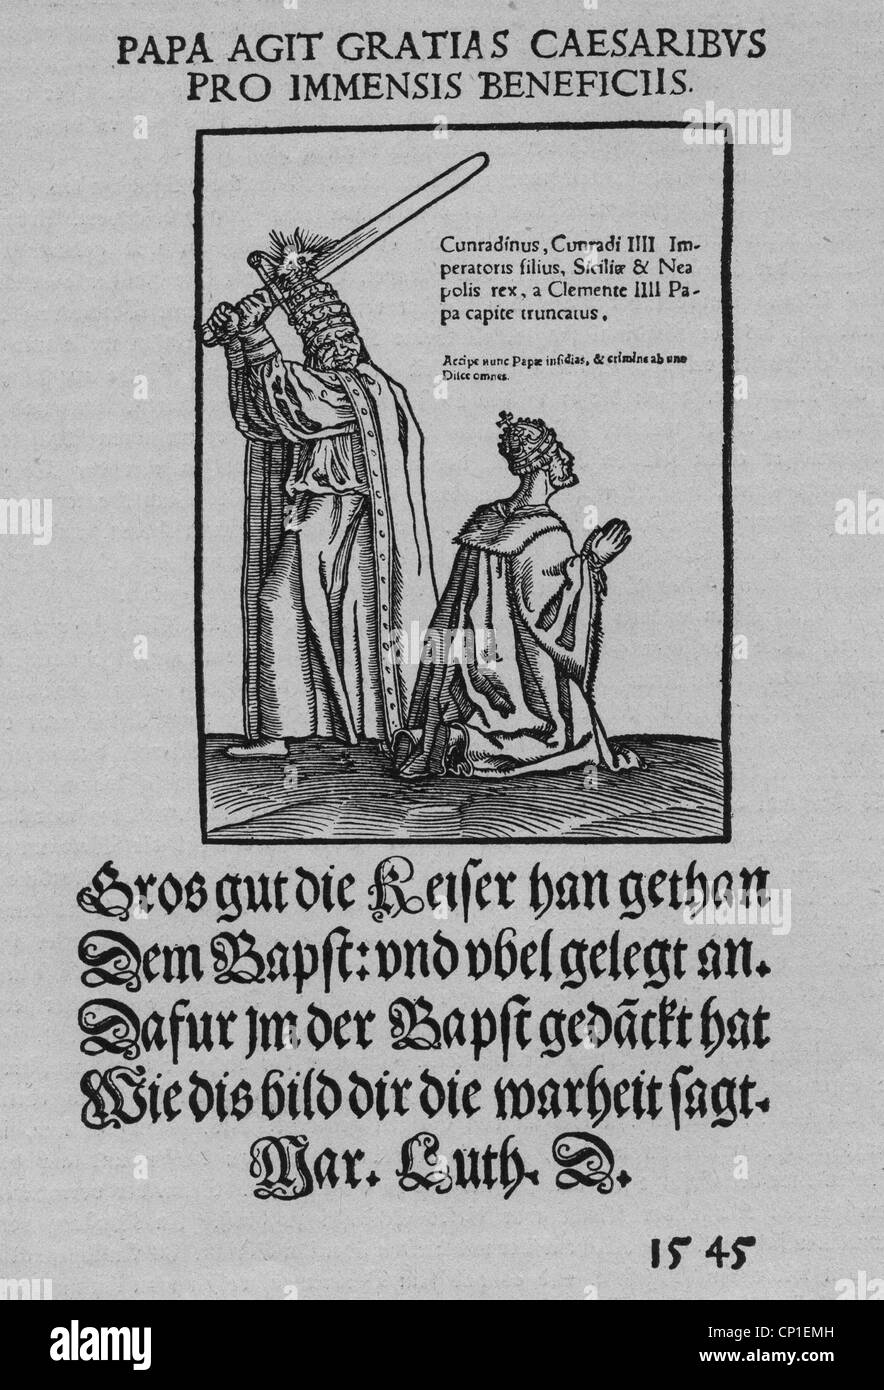 events, Protestant Reformation, 1517 - 1555, flyer, satire, 'Papa agit gratias caesaribus pro immensis beneficiis' (The pope acts gratefully for the immense benefits he receives from the emperor), text by Martin Luther, woodcut by Lucas Cranach, 1545, Additional-Rights-Clearences-Not Available Stock Photo